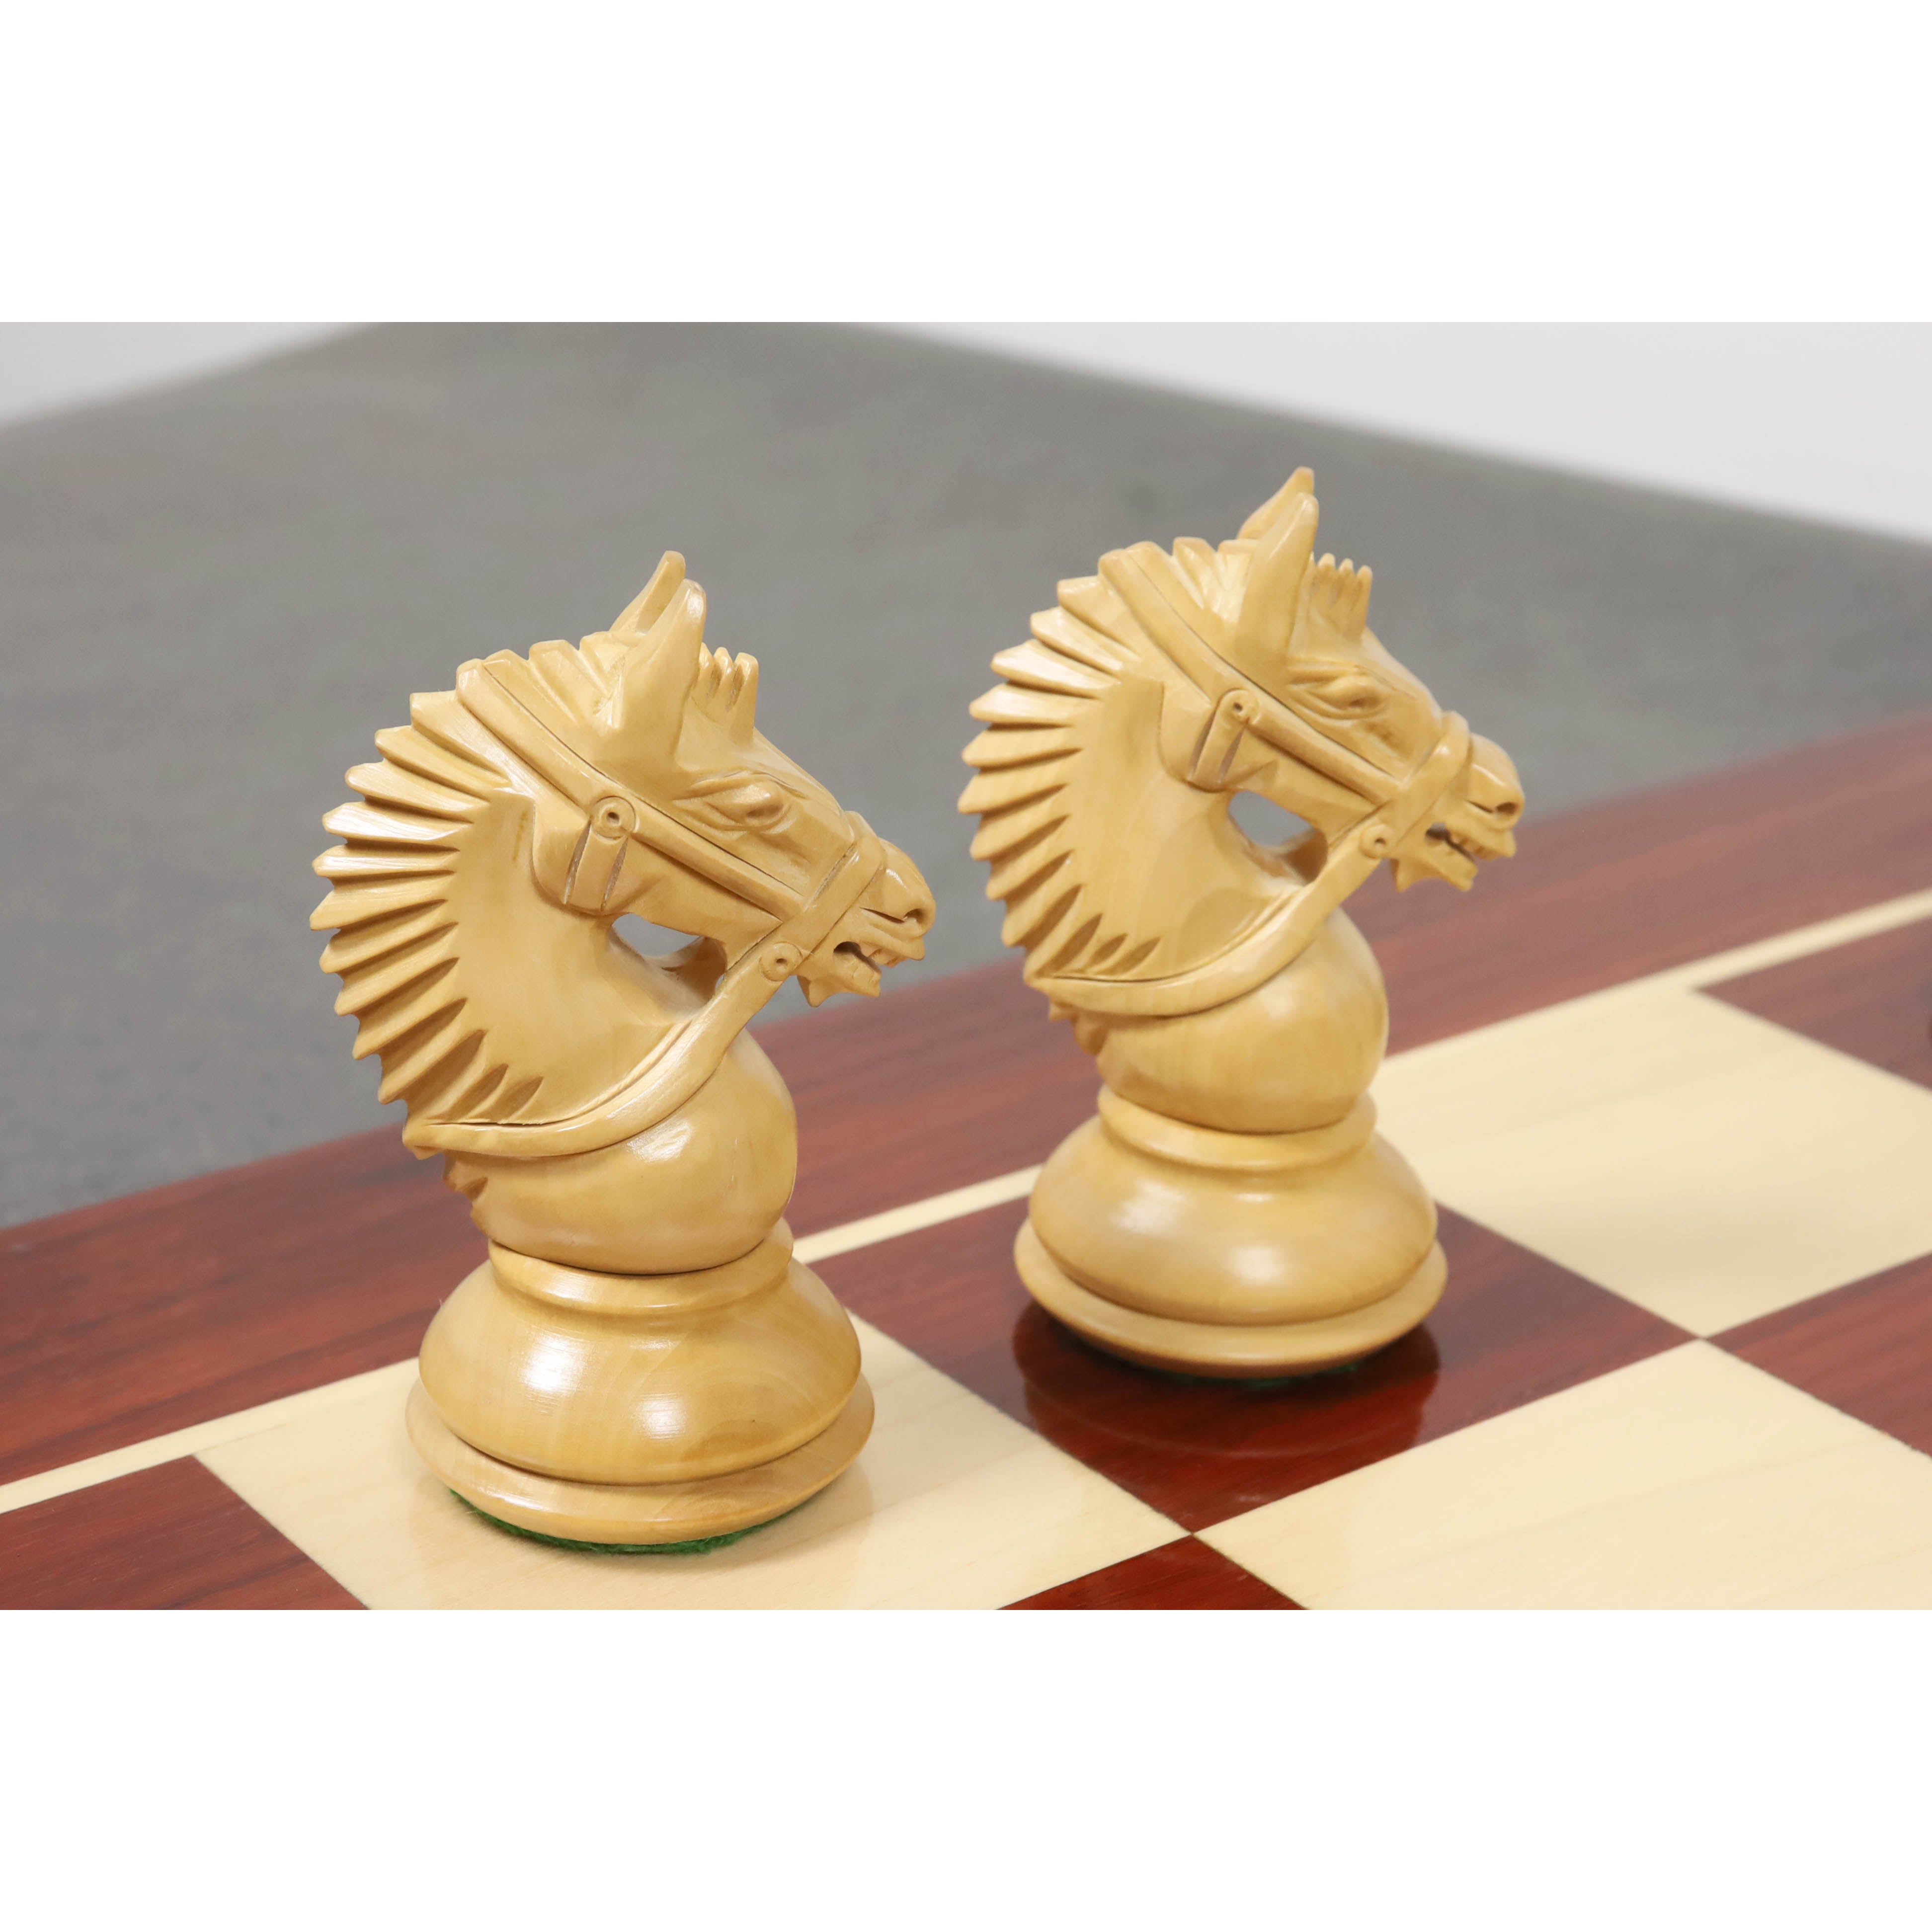 4.2" American Staunton Luxury Chess Pieces Only Set-Triple Weighted Budrose Wood